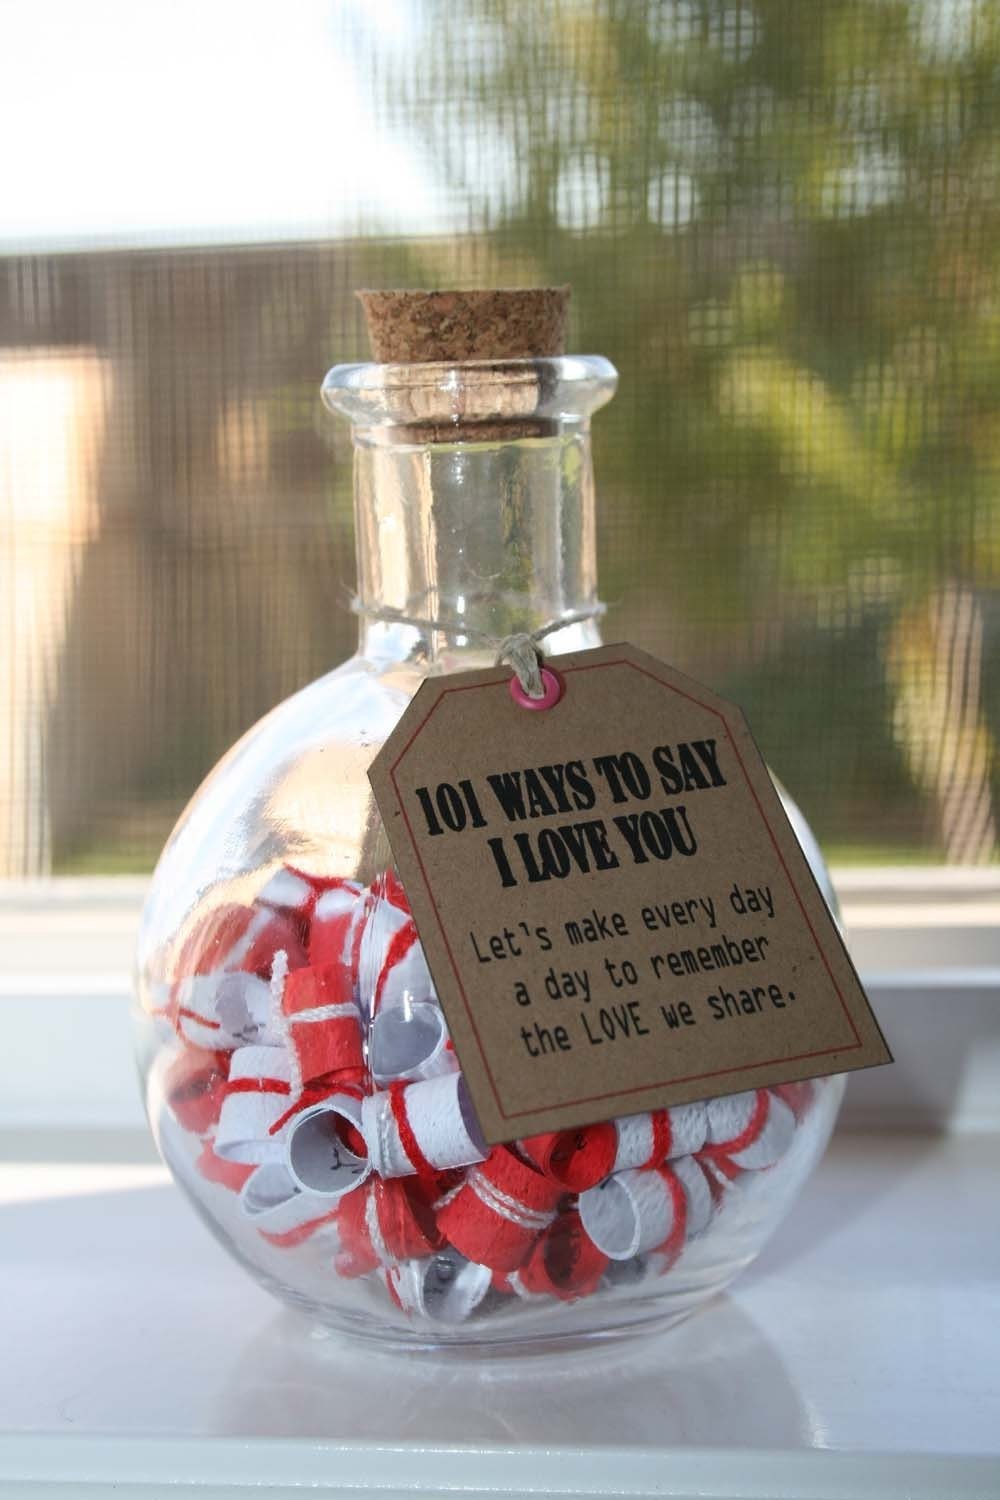 10 Perfect Cheap Gift Ideas For Girlfriend anniversary gift 101 ways to say i love you unique cute gift 1 2022